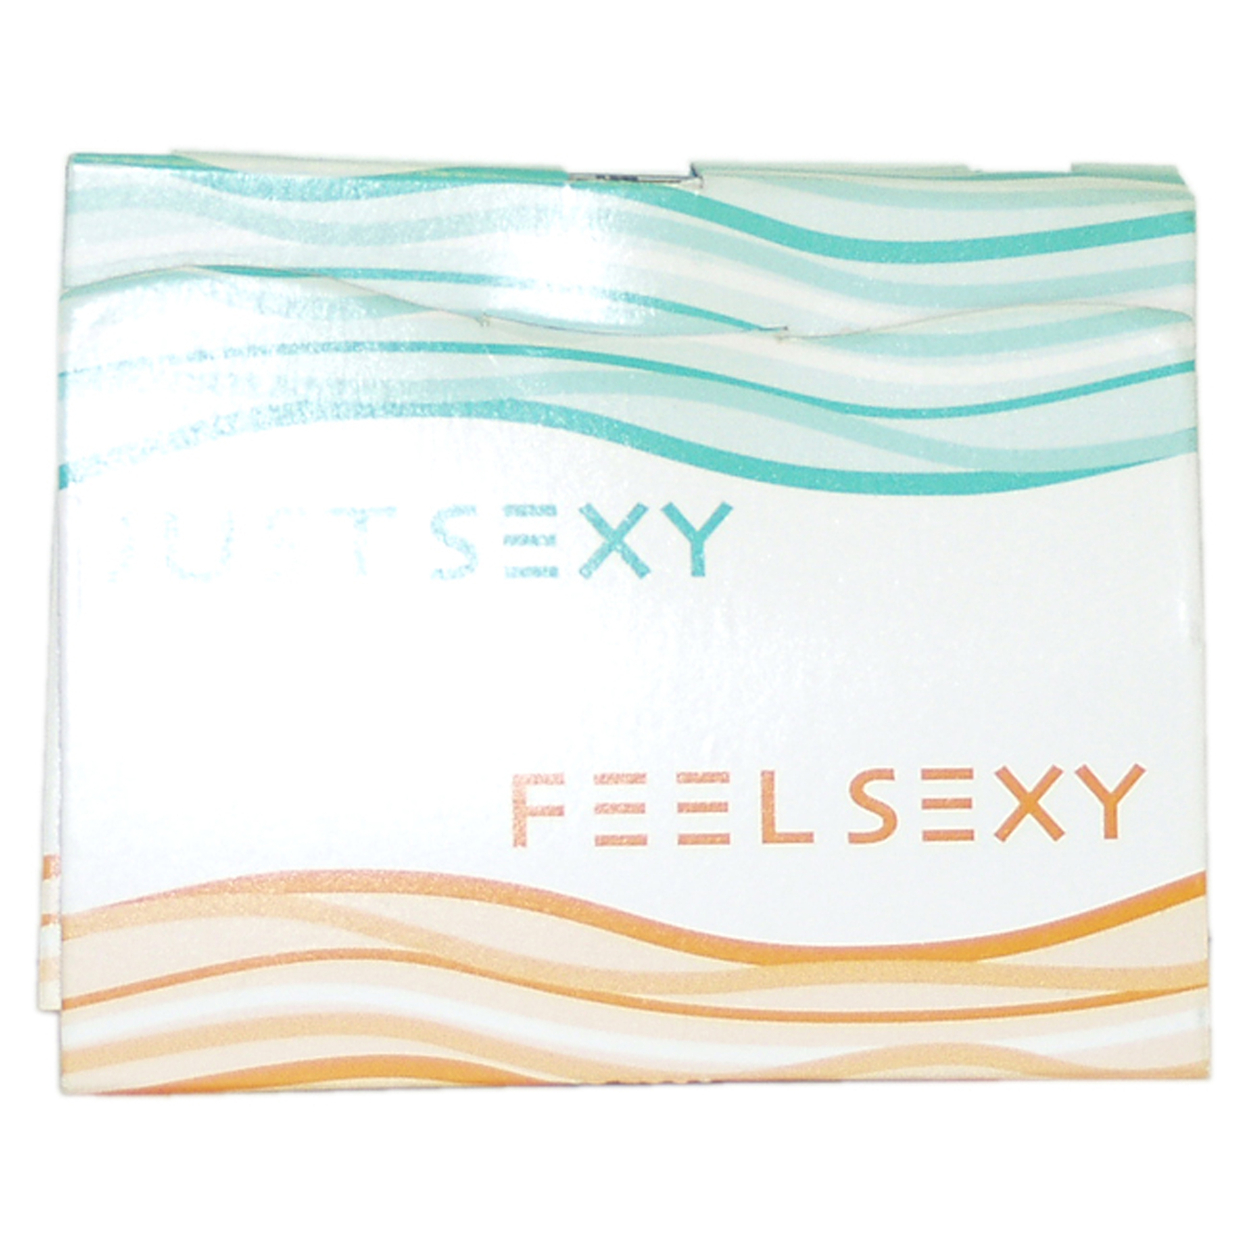 Giorgio Beverly Hills 90210 Sexy Just Sexy And Feel Sexy EDT Splash Vial 2 X 2 Ml